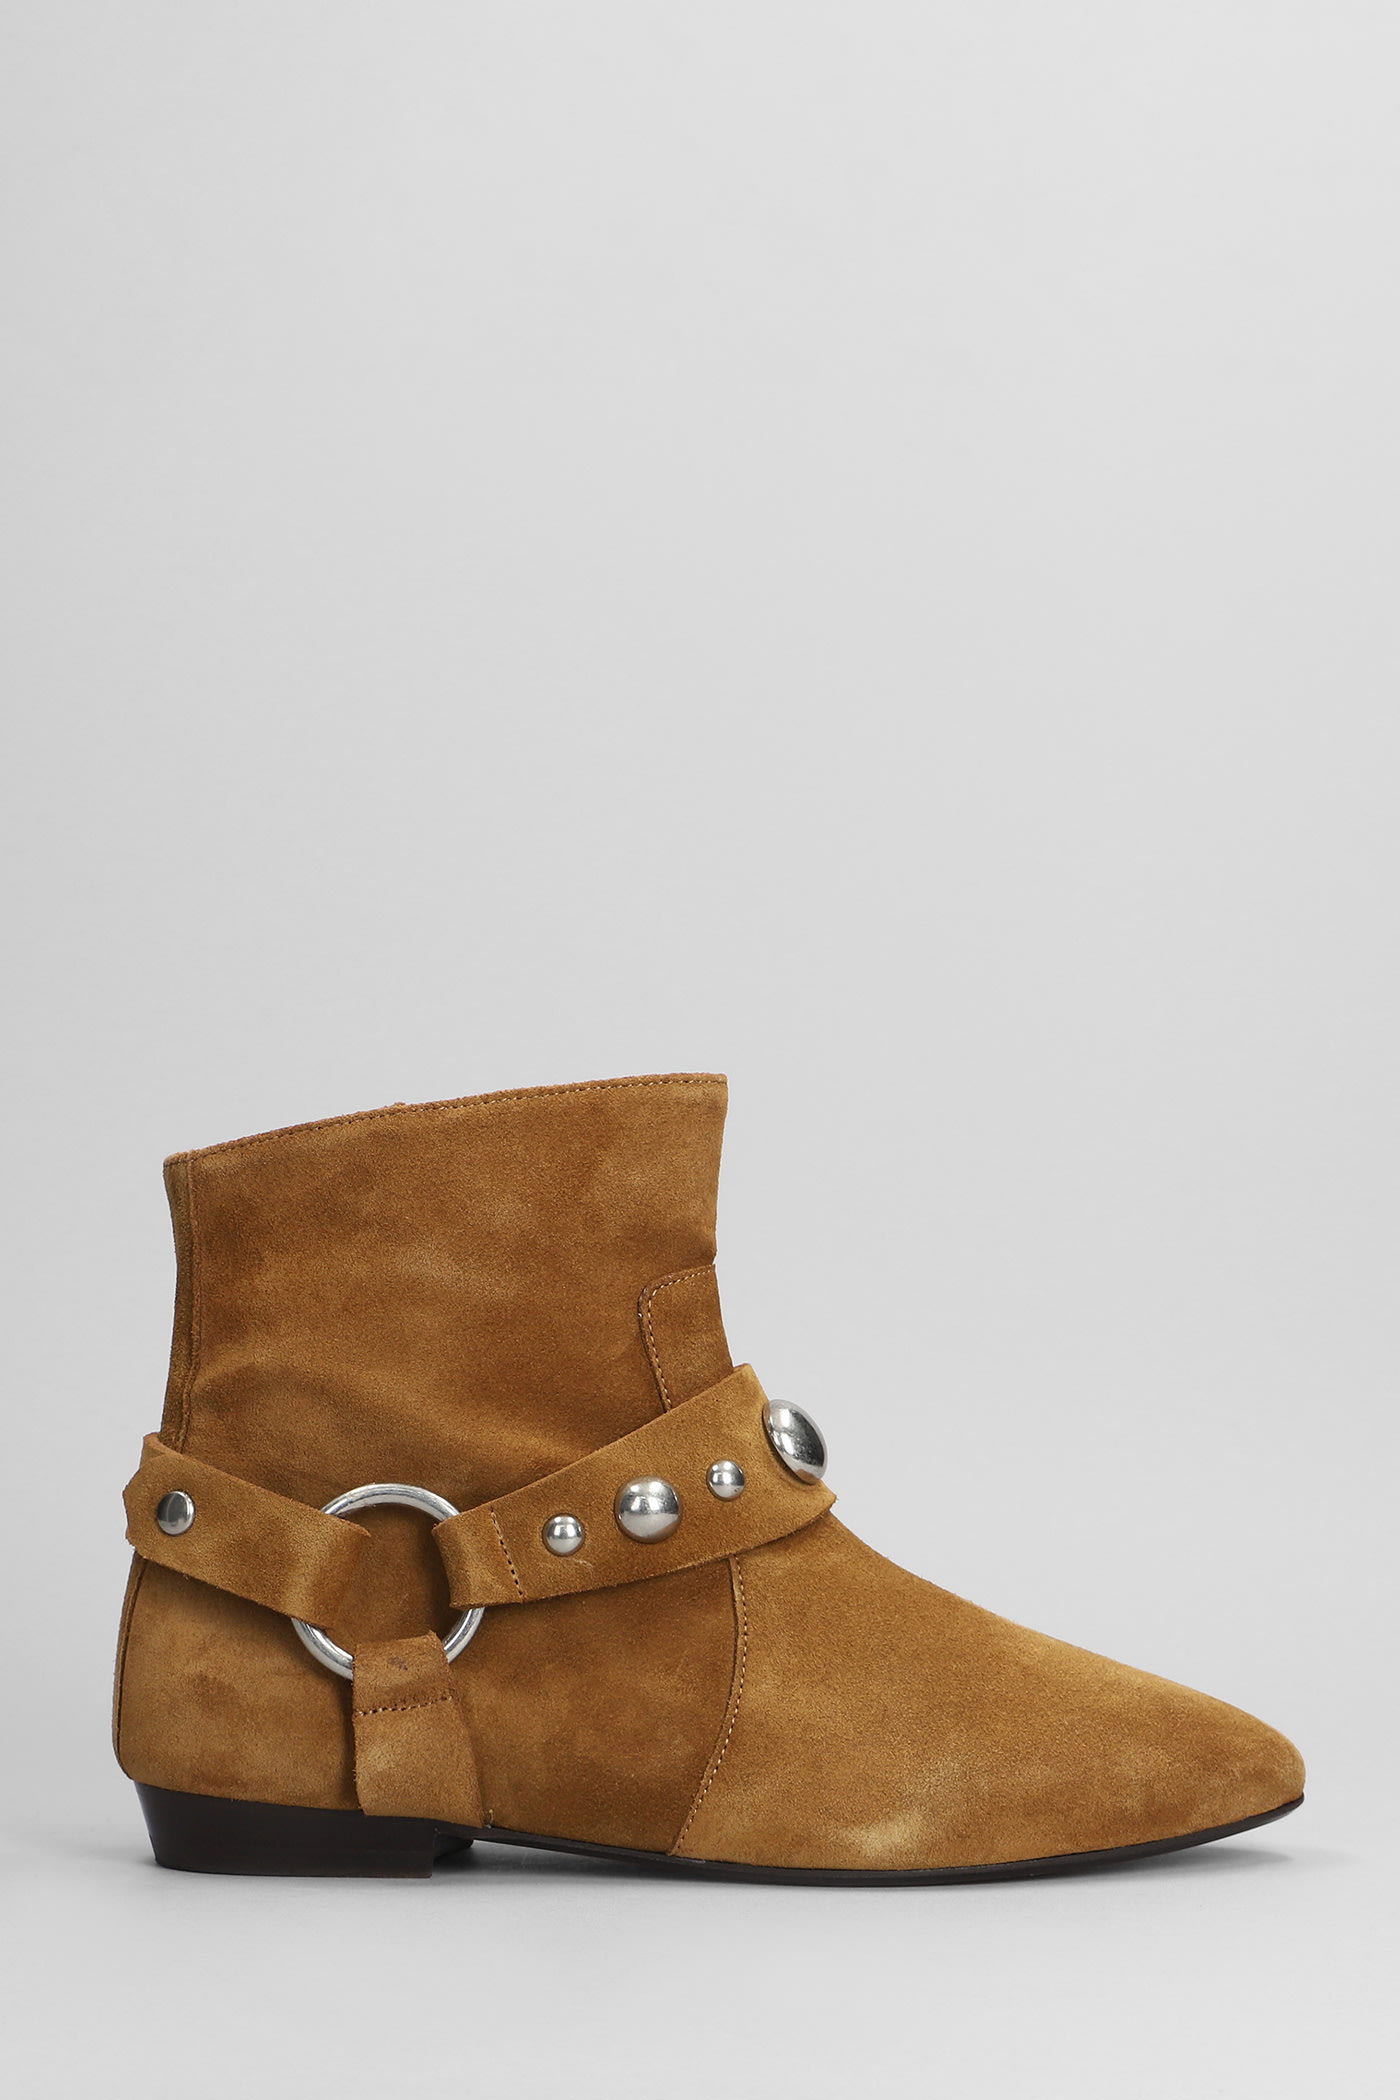 Siago Low Heels Ankle Boots In Leather Color Suede